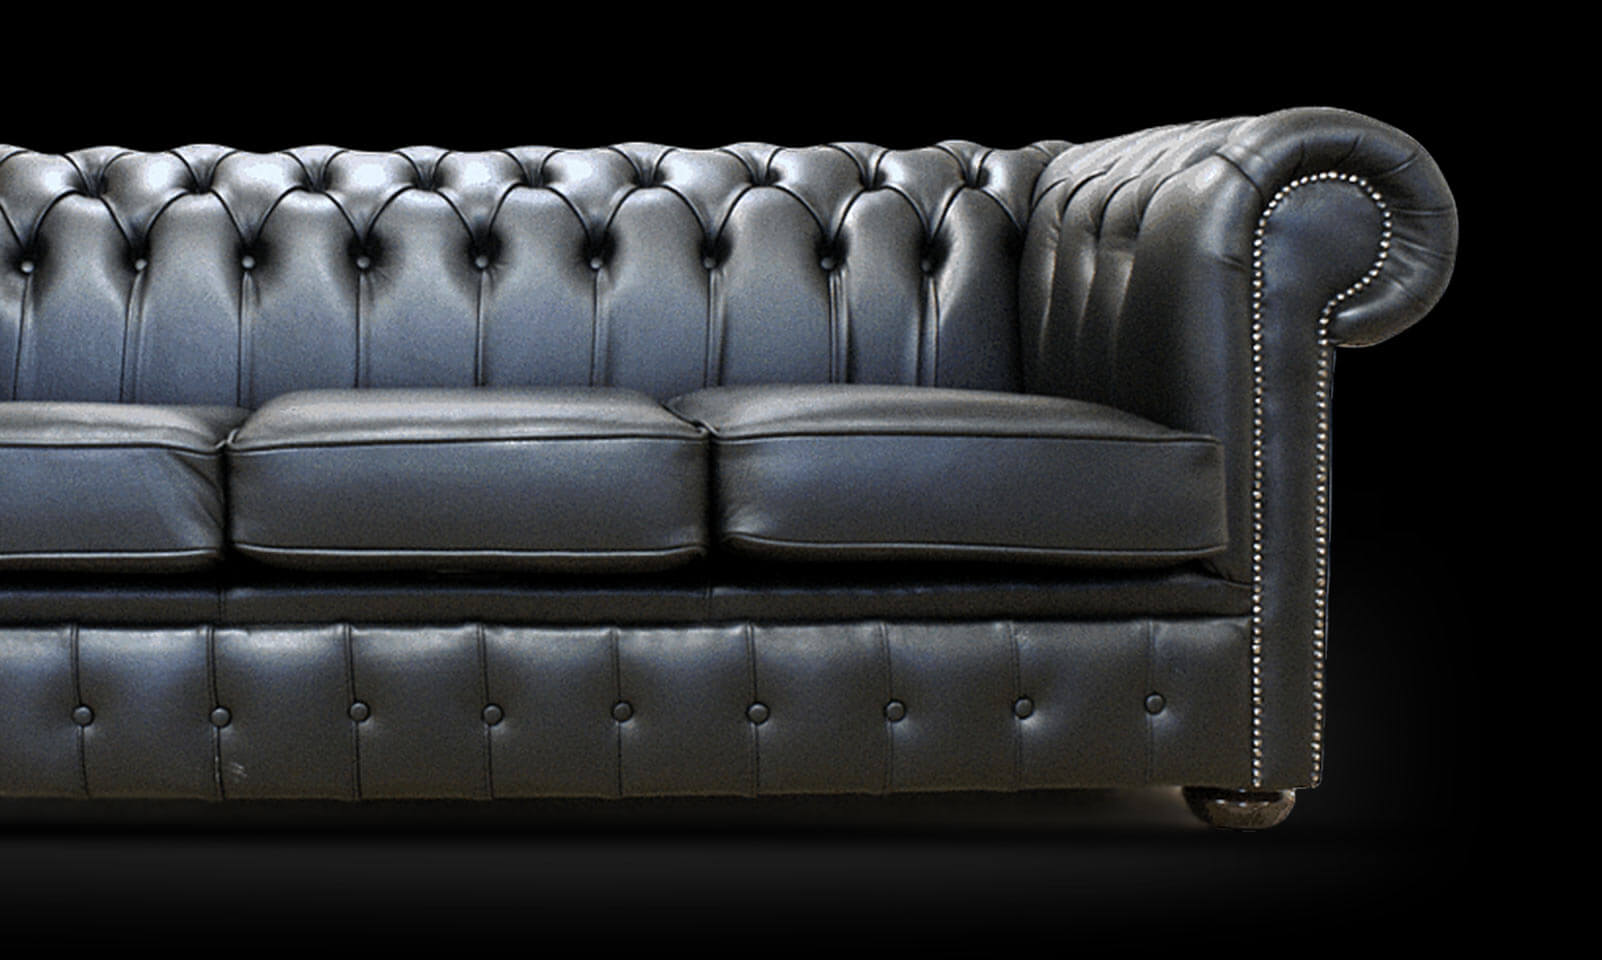 Chesterfield Sofas – Chesterfield Special Offers